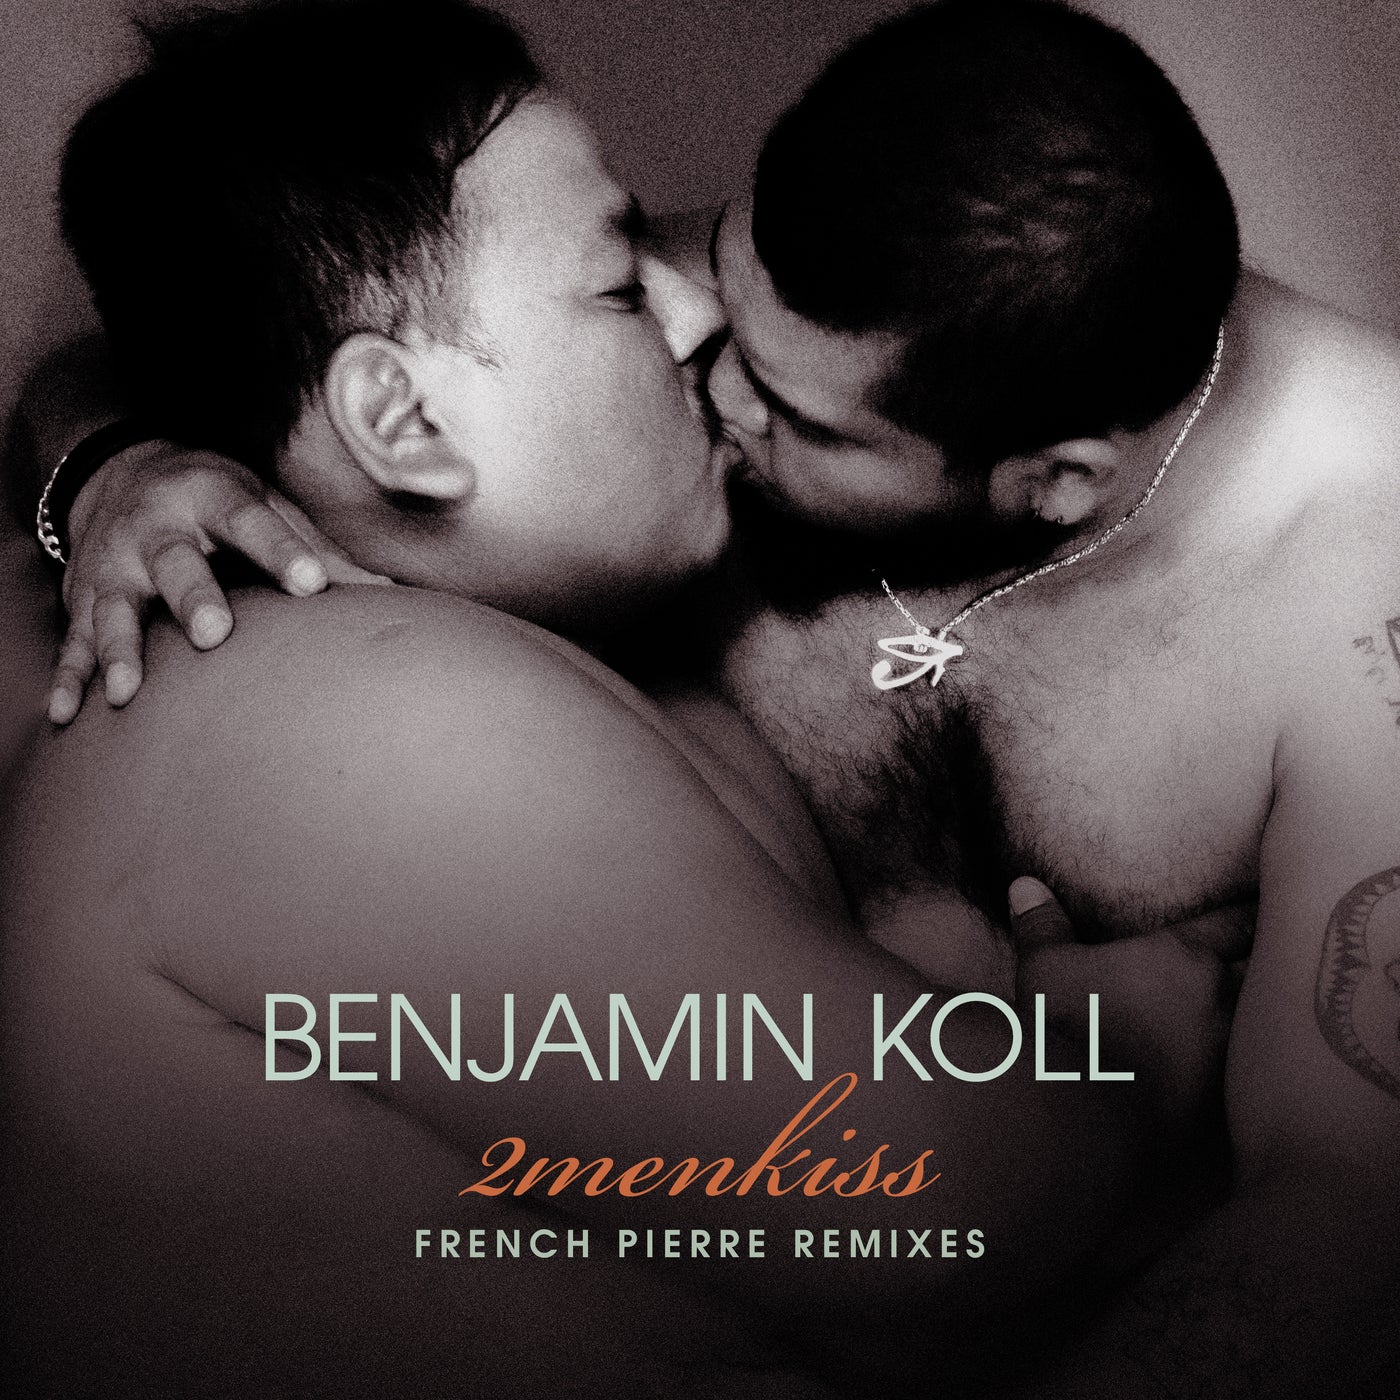 2menkiss (French Pierre Remixes)